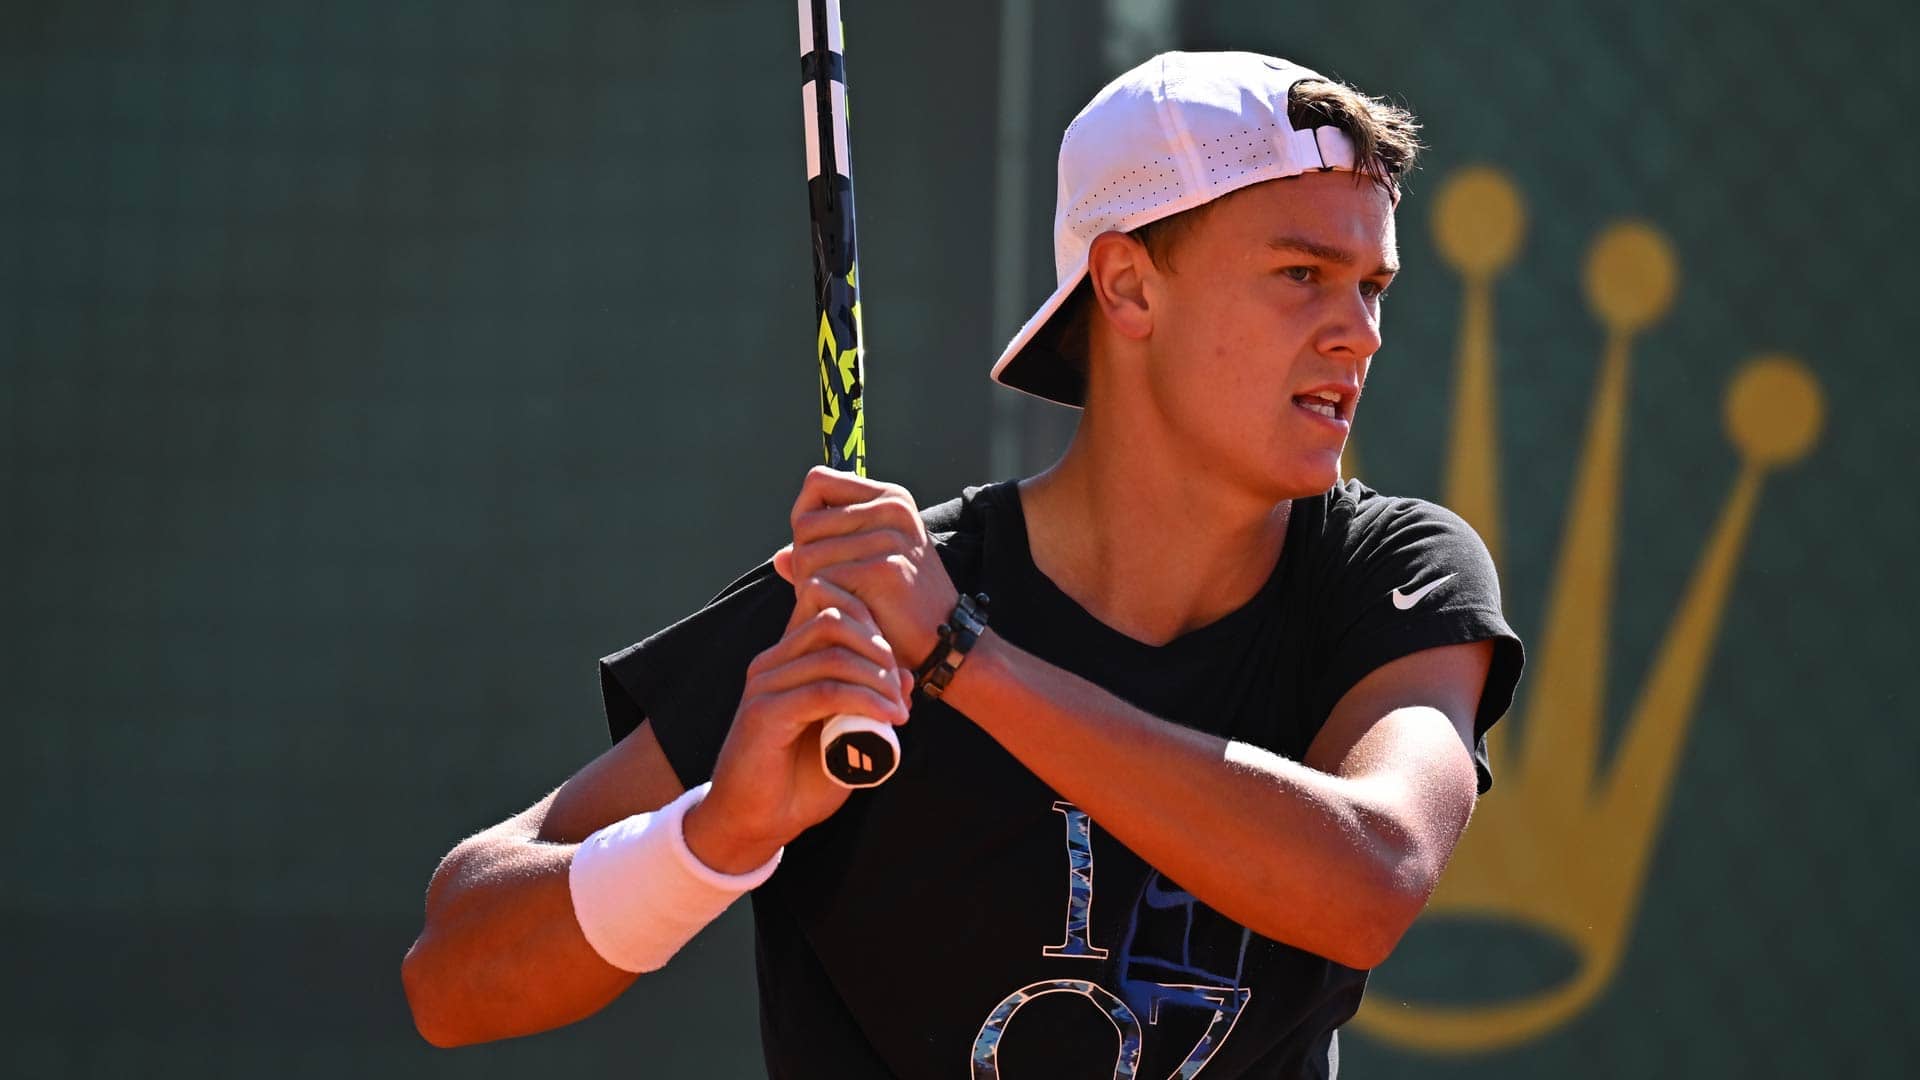 Holger Rune meets Dominic Thiem for the first time on Wednesday in Monte-Carlo.